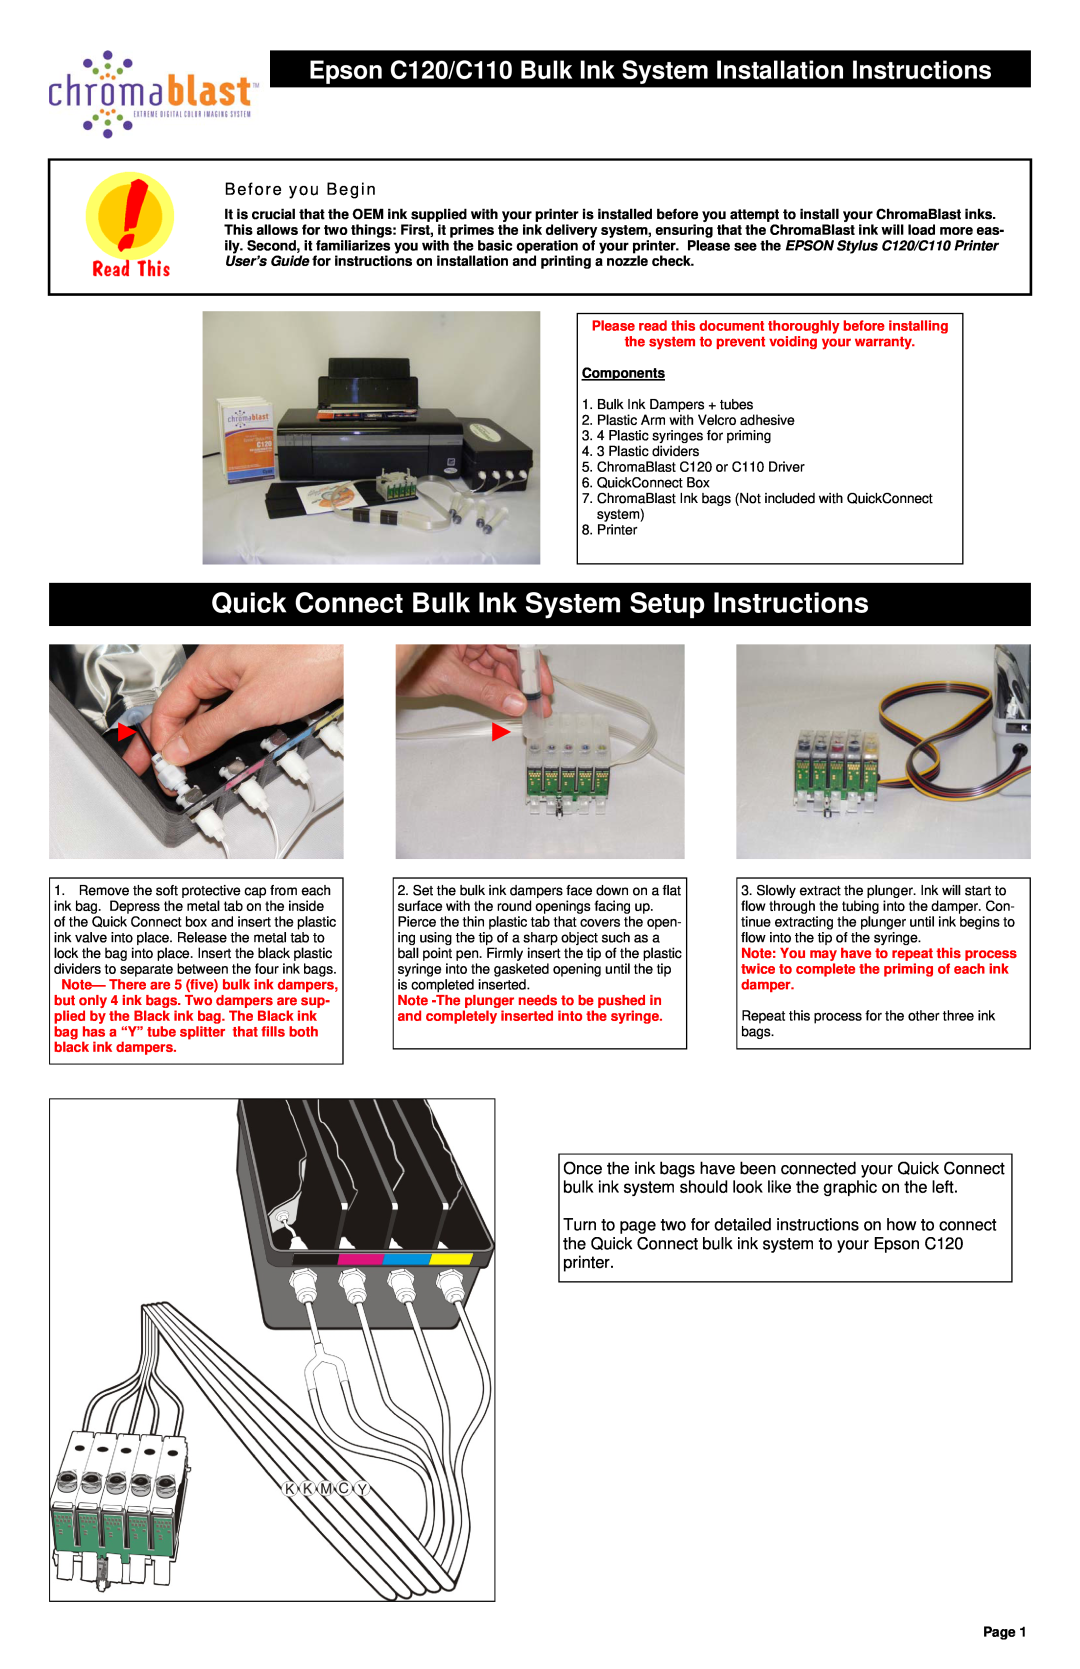 Epson C120 installation instructions Quick Connect Bulk Ink System Setup Instructions, Before you Begin 